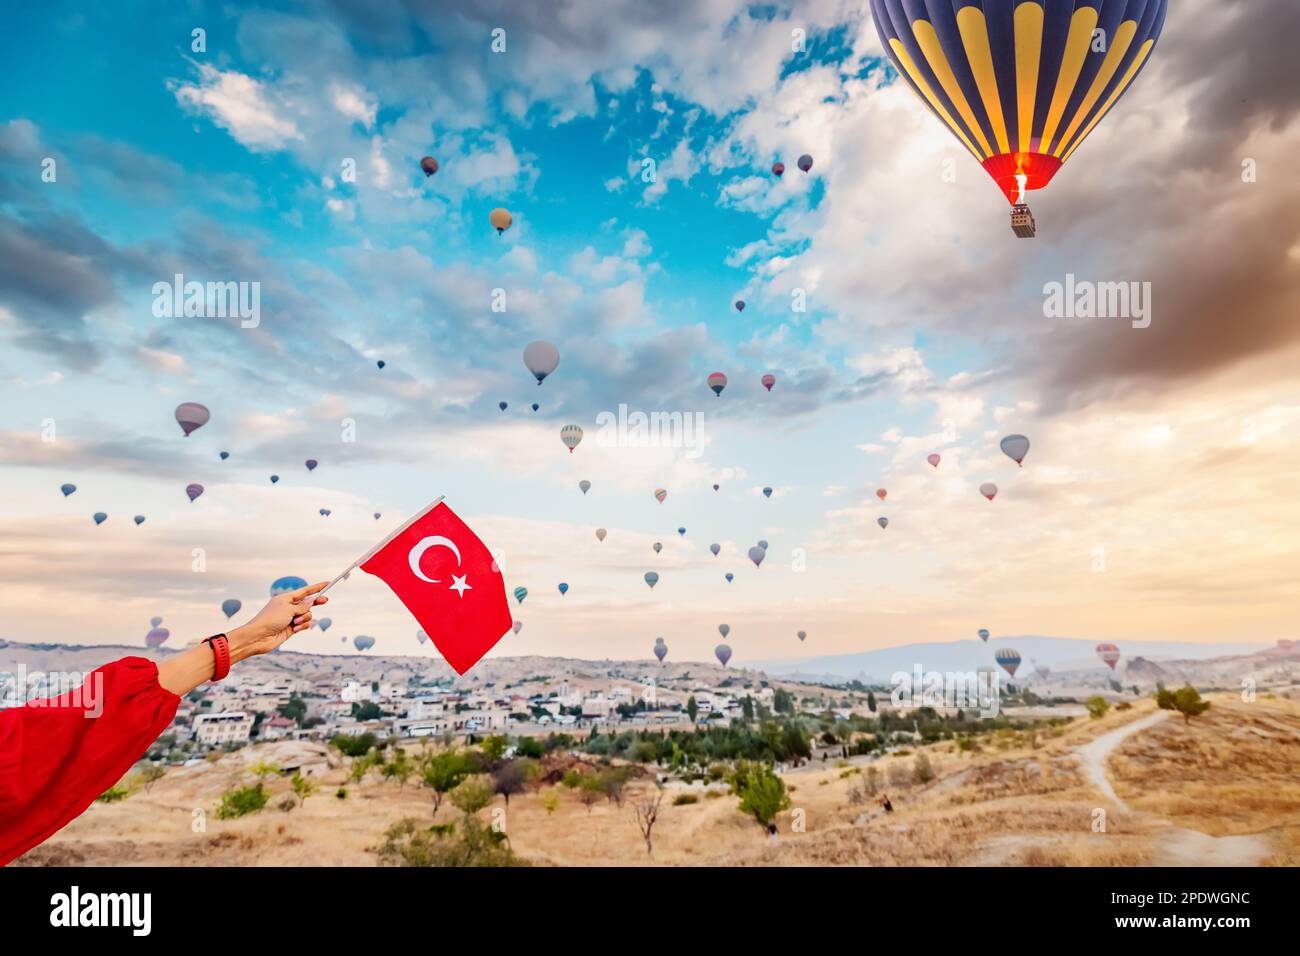 Experience the beauty and culture of Turkey through the eyes of a young woman as she watches the hot air balloons of Cappadocia soar and displays the Stock Photo